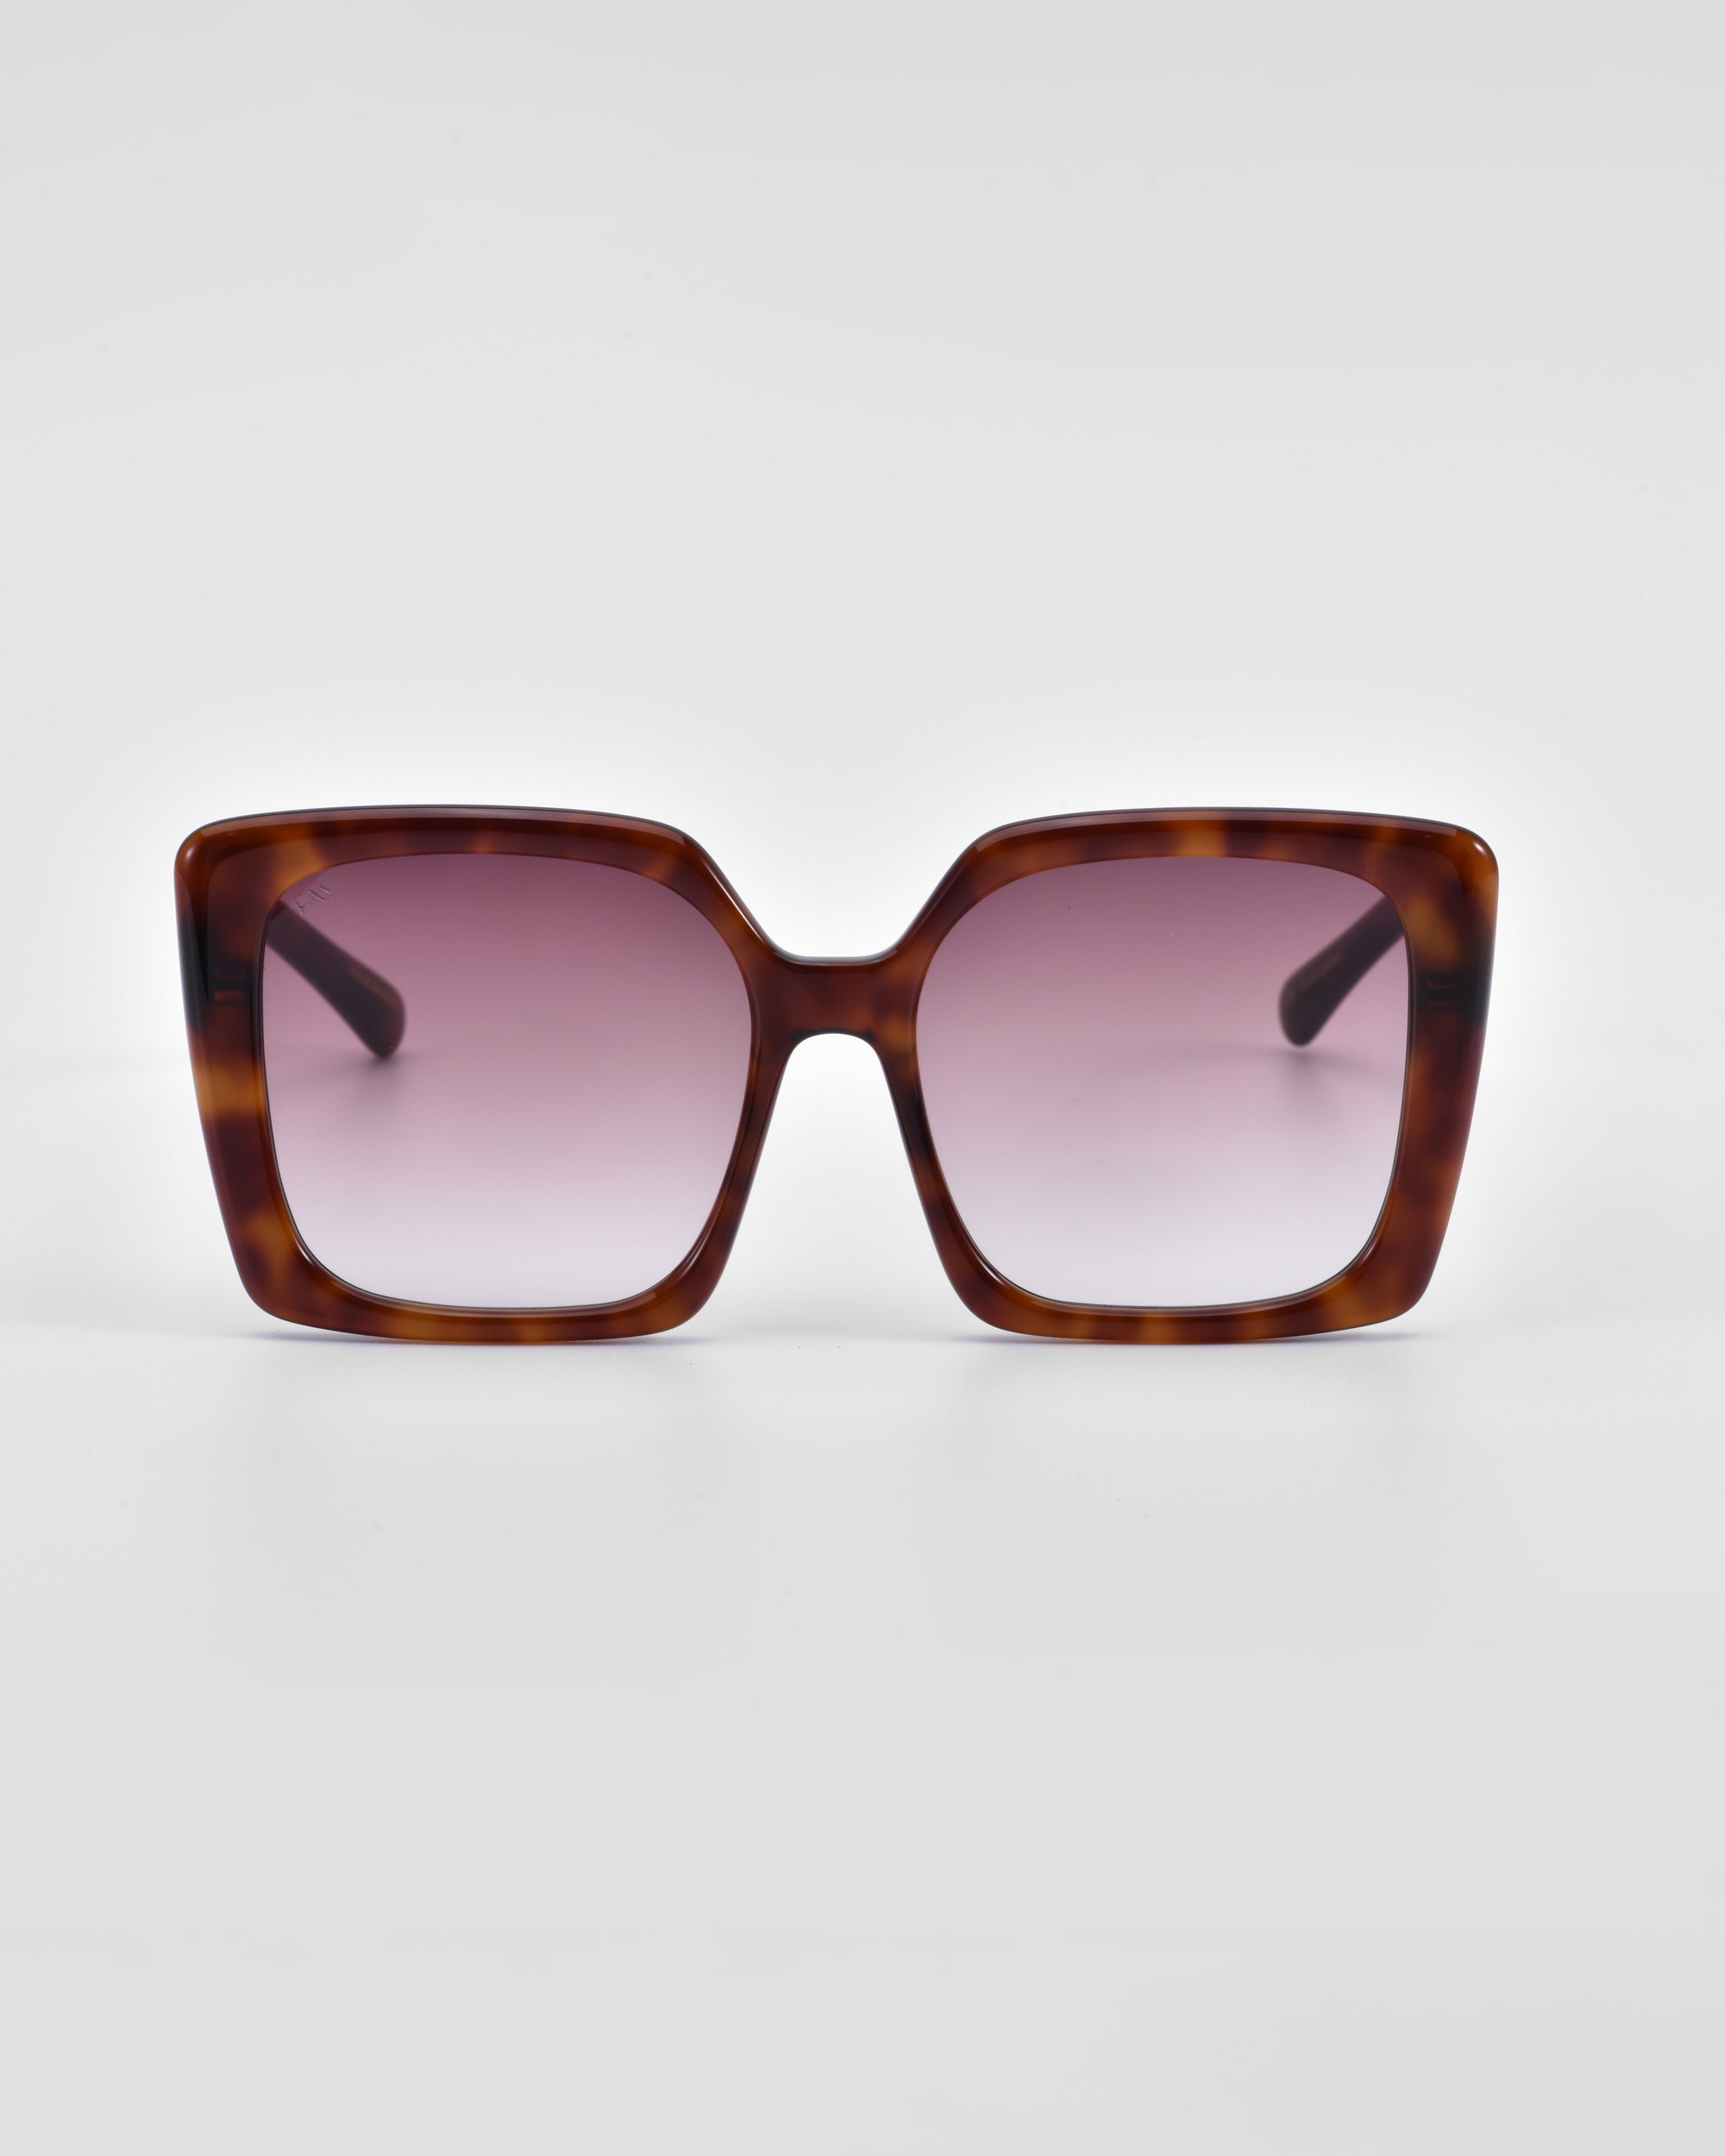 A pair of large, square-framed For Art's Sake® Eos sunglasses with a tortoiseshell pattern and gradient pink lenses is centered against a plain white background. Featuring an oversized soft-square silhouette, the For Art's Sake® Eos sunglasses have a modern, stylish design with wide arms.